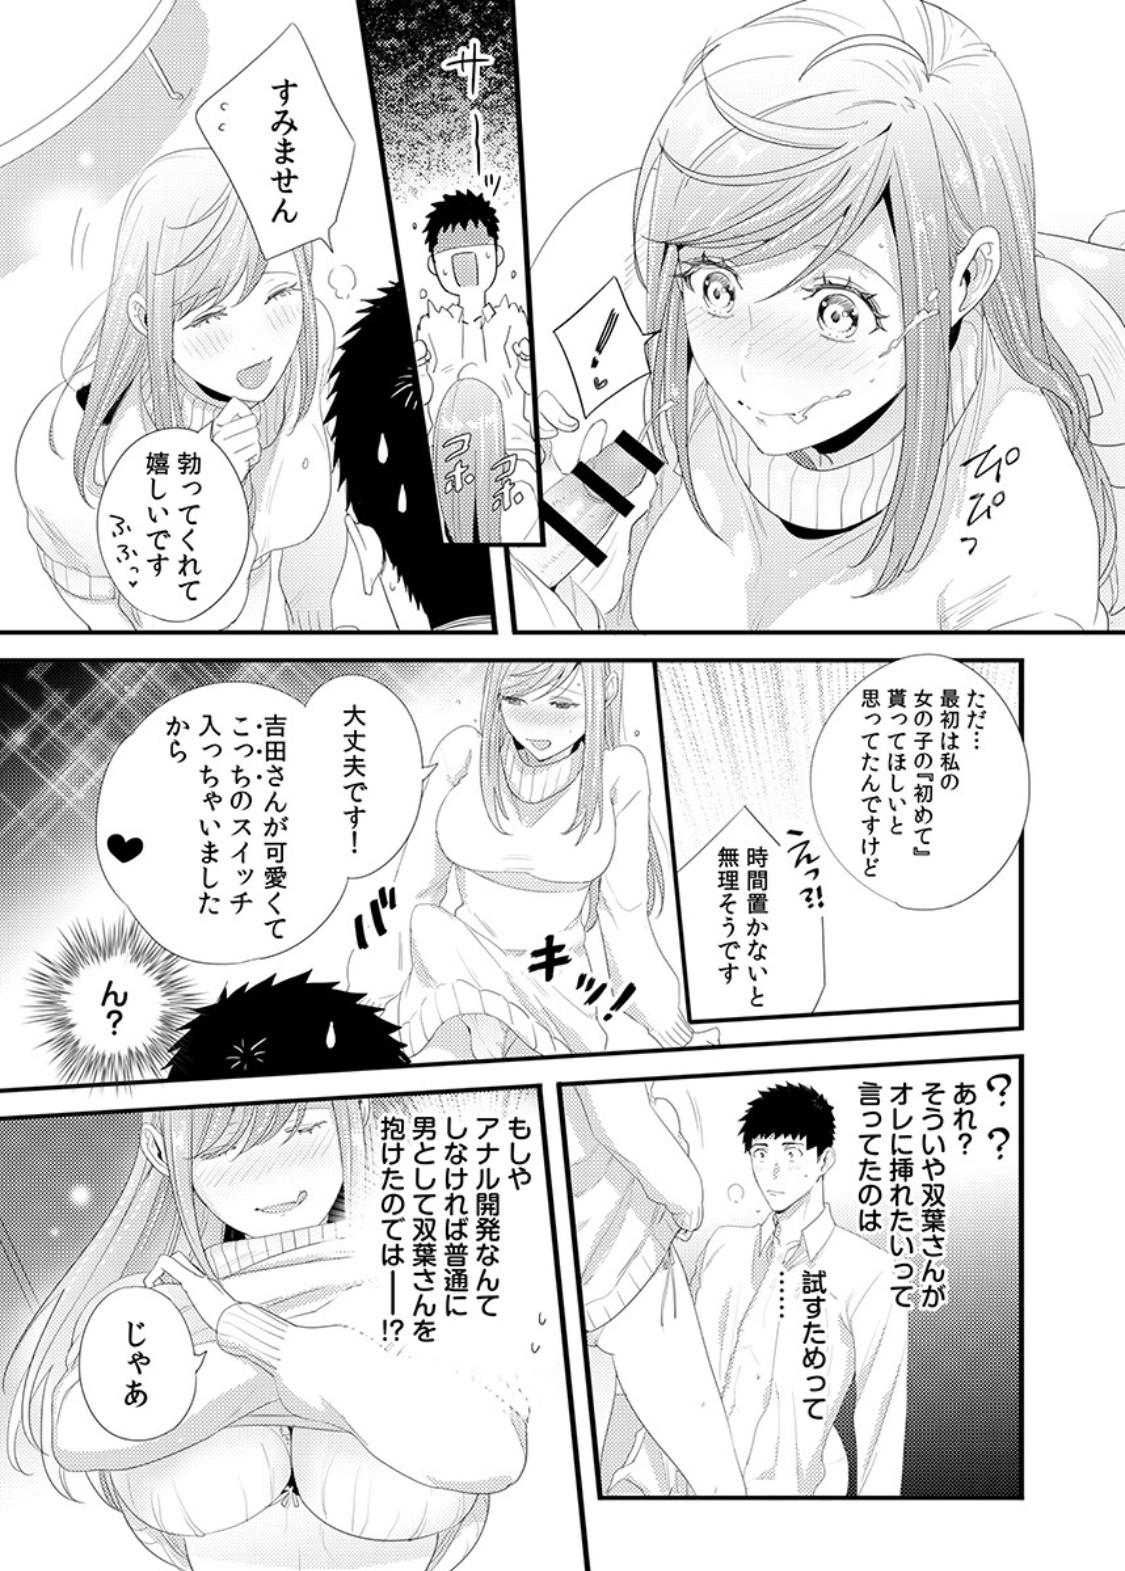 Please Let Me Hold You Futaba-San! Ch. 1+2 51